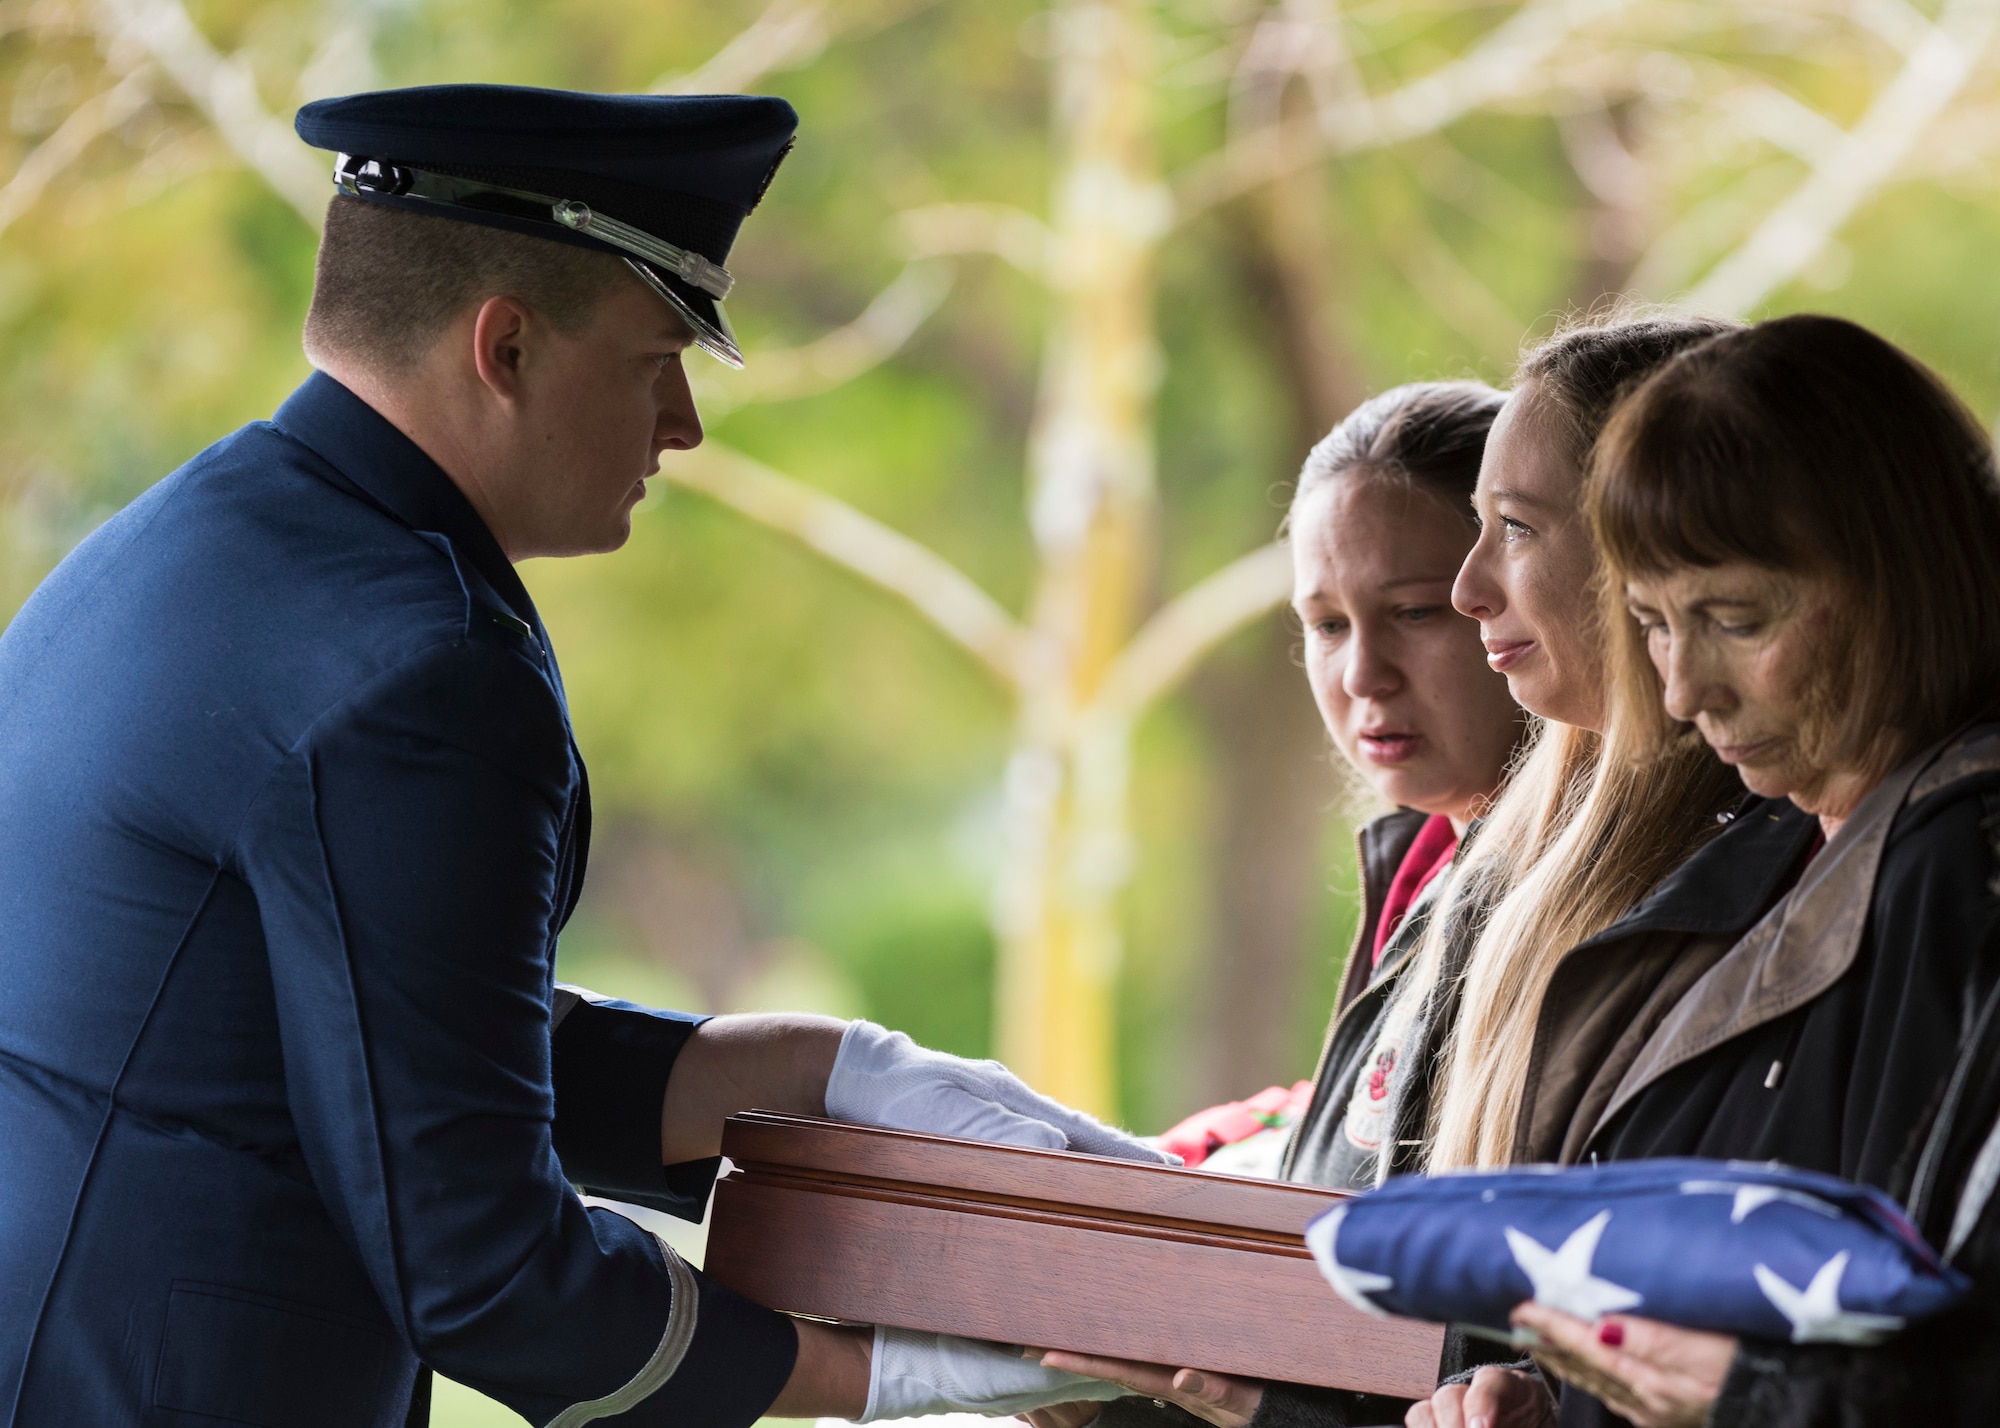 1st Lt. Andrew Forsythe, Honor Guard officer in charge, presents a flag to a family member of the deceased during a U.S. Air Force active duty funeral March 2, 2019, in Camarillo, Calif. According to the United States Department of Veteran Affairs, a military burial flag is provided to a deceased veteran in order to honor the memory of his service to the country. (U.S. Air Force photo by Airman 1st Class Aubree Milks)